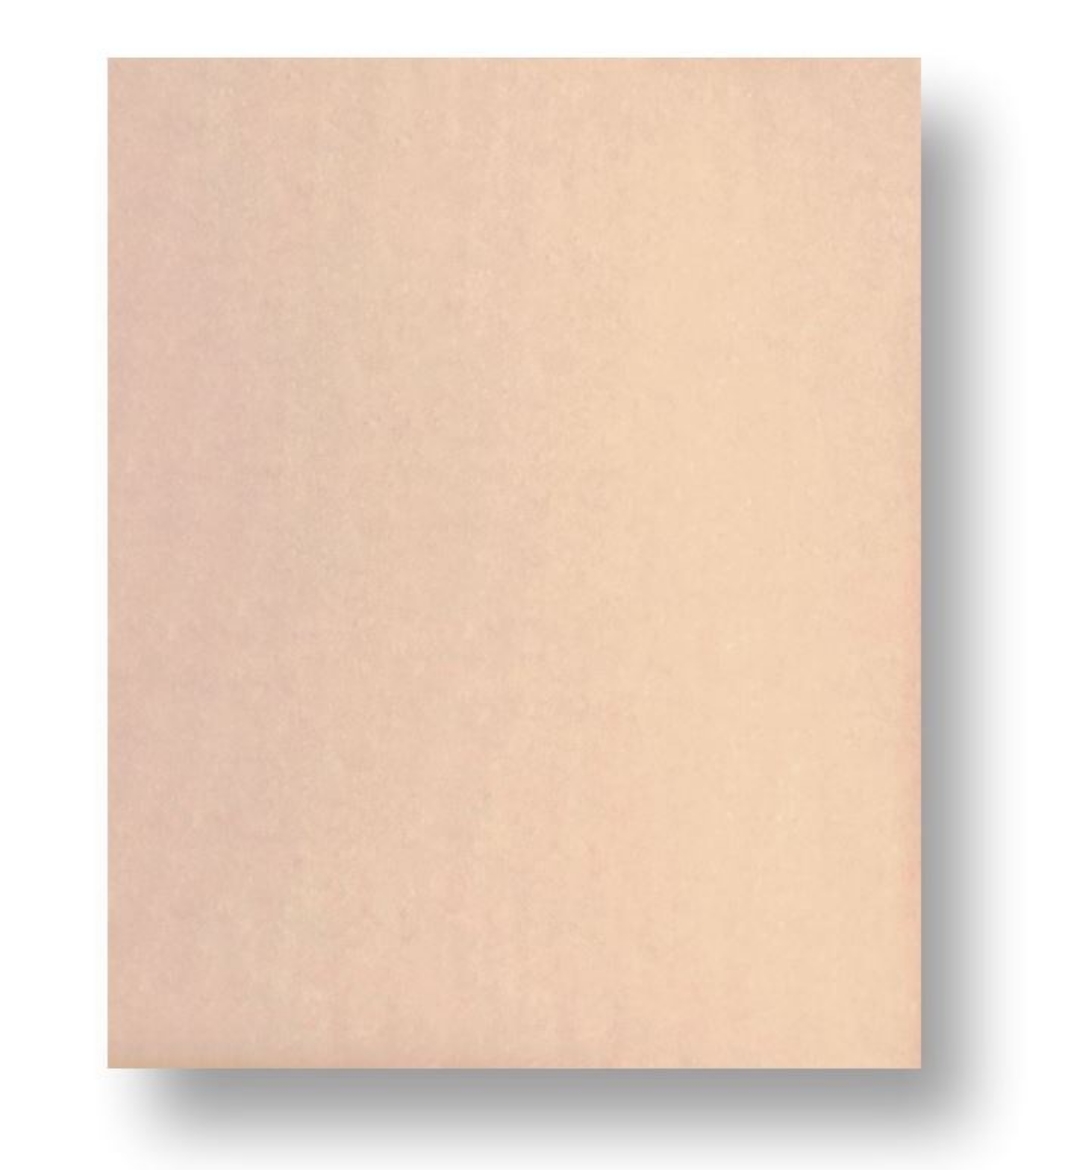 Picture of ABRASIVE SHEETS DRY - ALUMINIUM OXIDE 230 X 280MM - 180 GRIT (PACK OF 50)